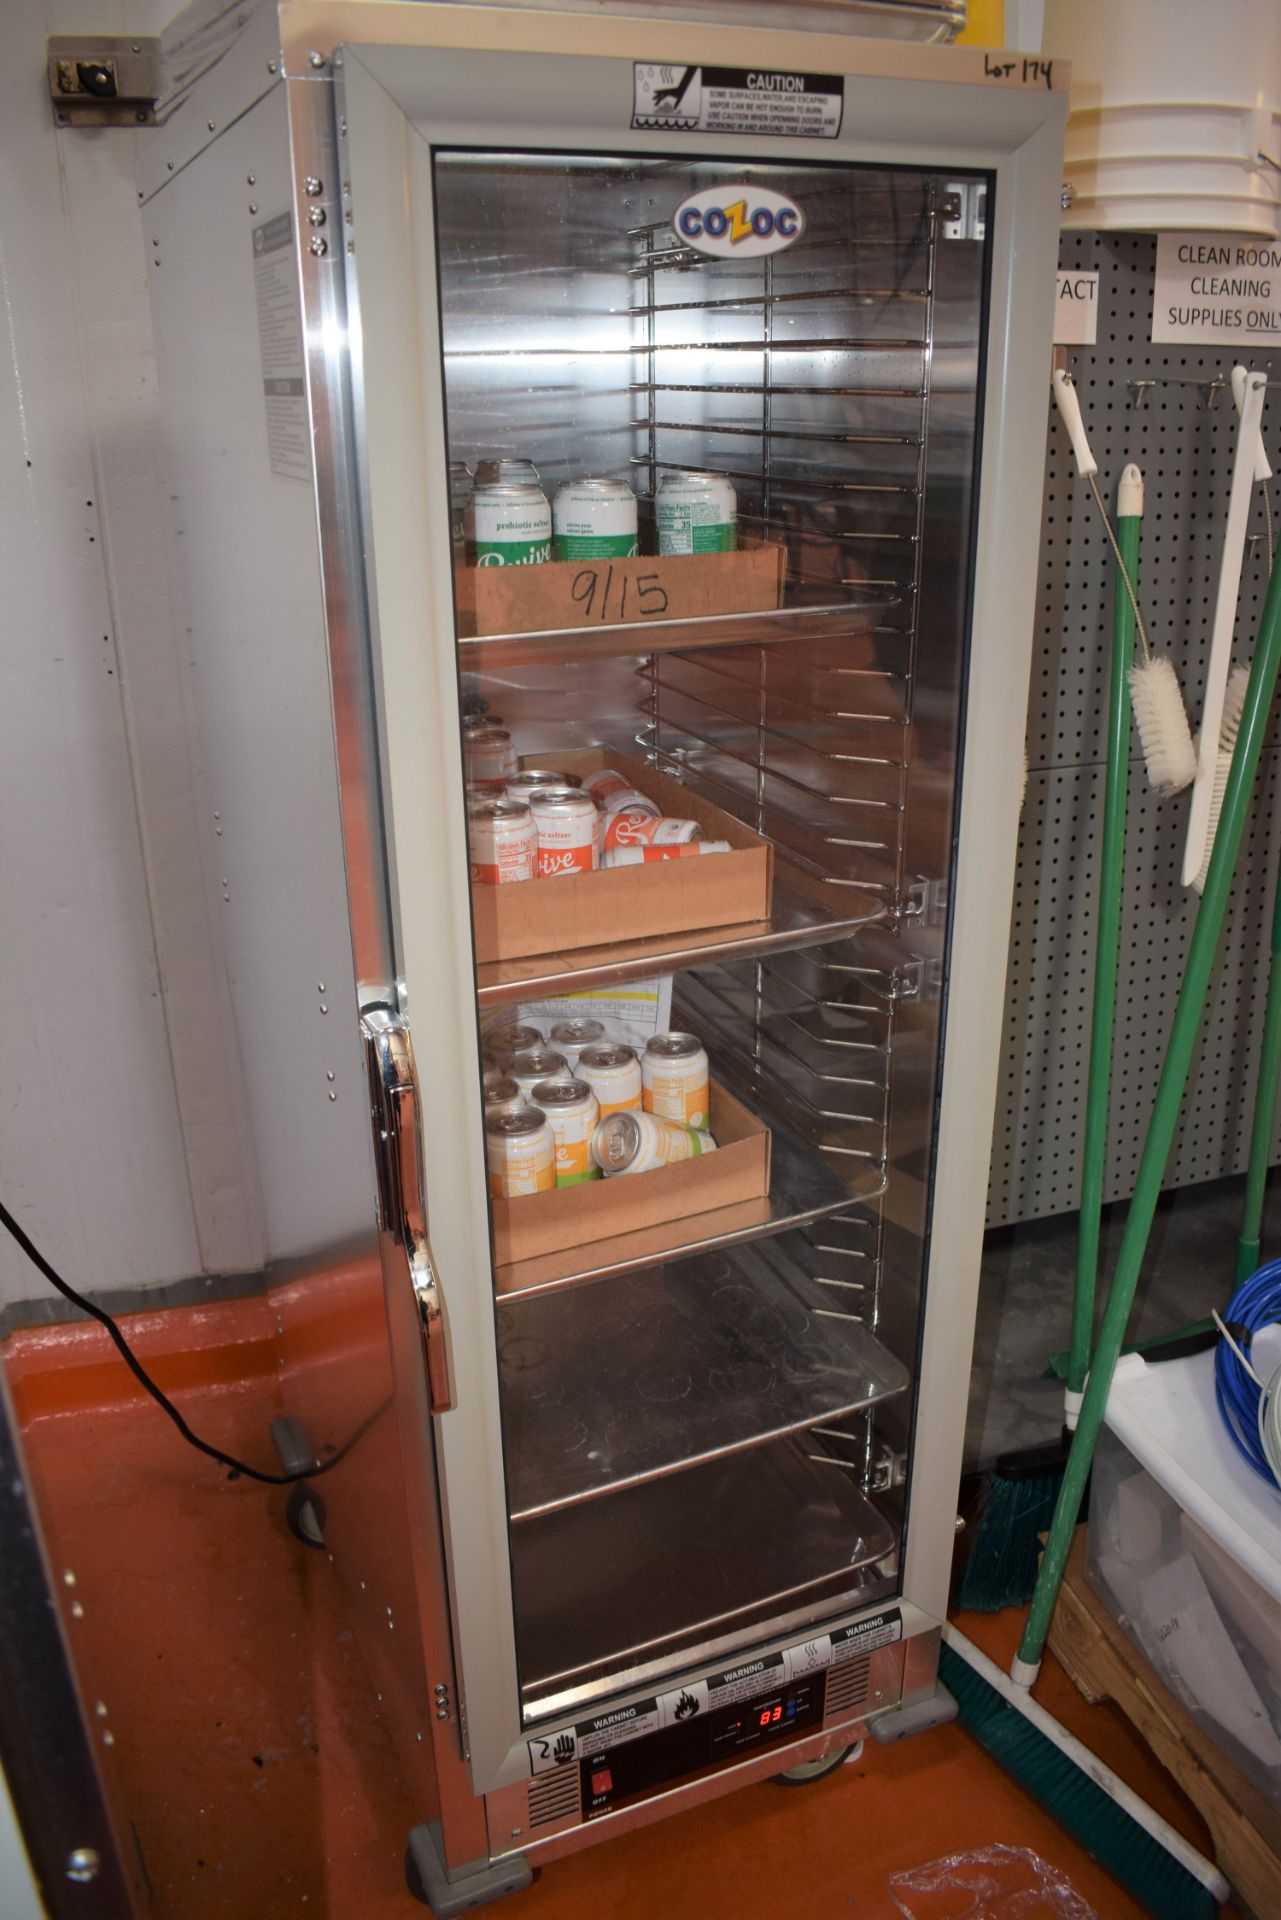 Cozoc Heated/Proofer Cabinet, Model HPC7008. Mounted on casters. - Image 4 of 5